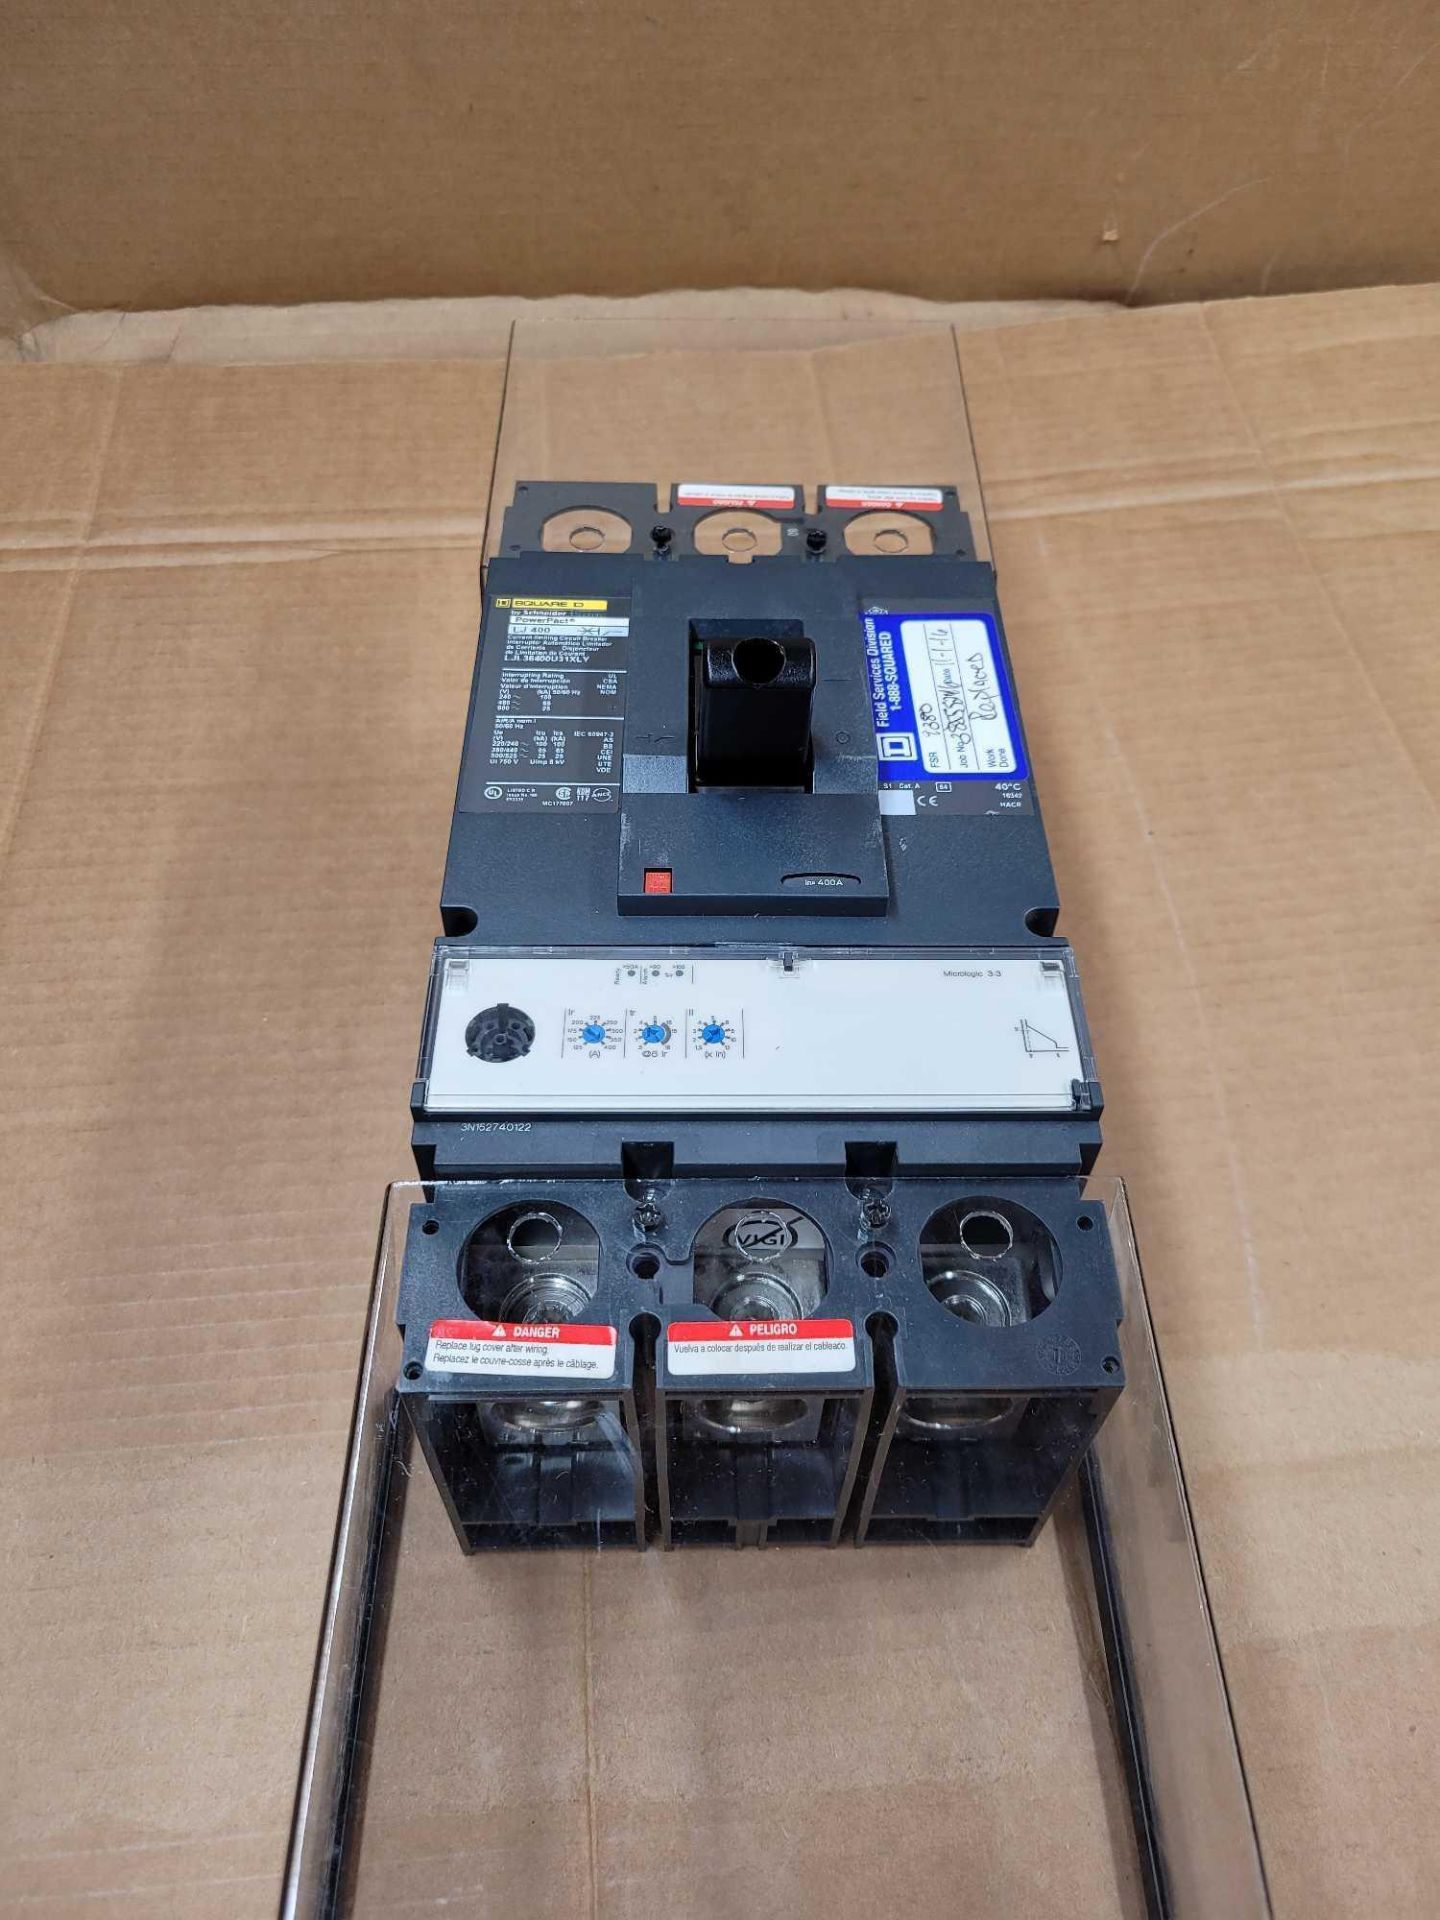 SQUARE D LJL36400U31XLY / 400 Amp Molded Case Circuit Breaker  /  Lot Weight: 13.0 lbs